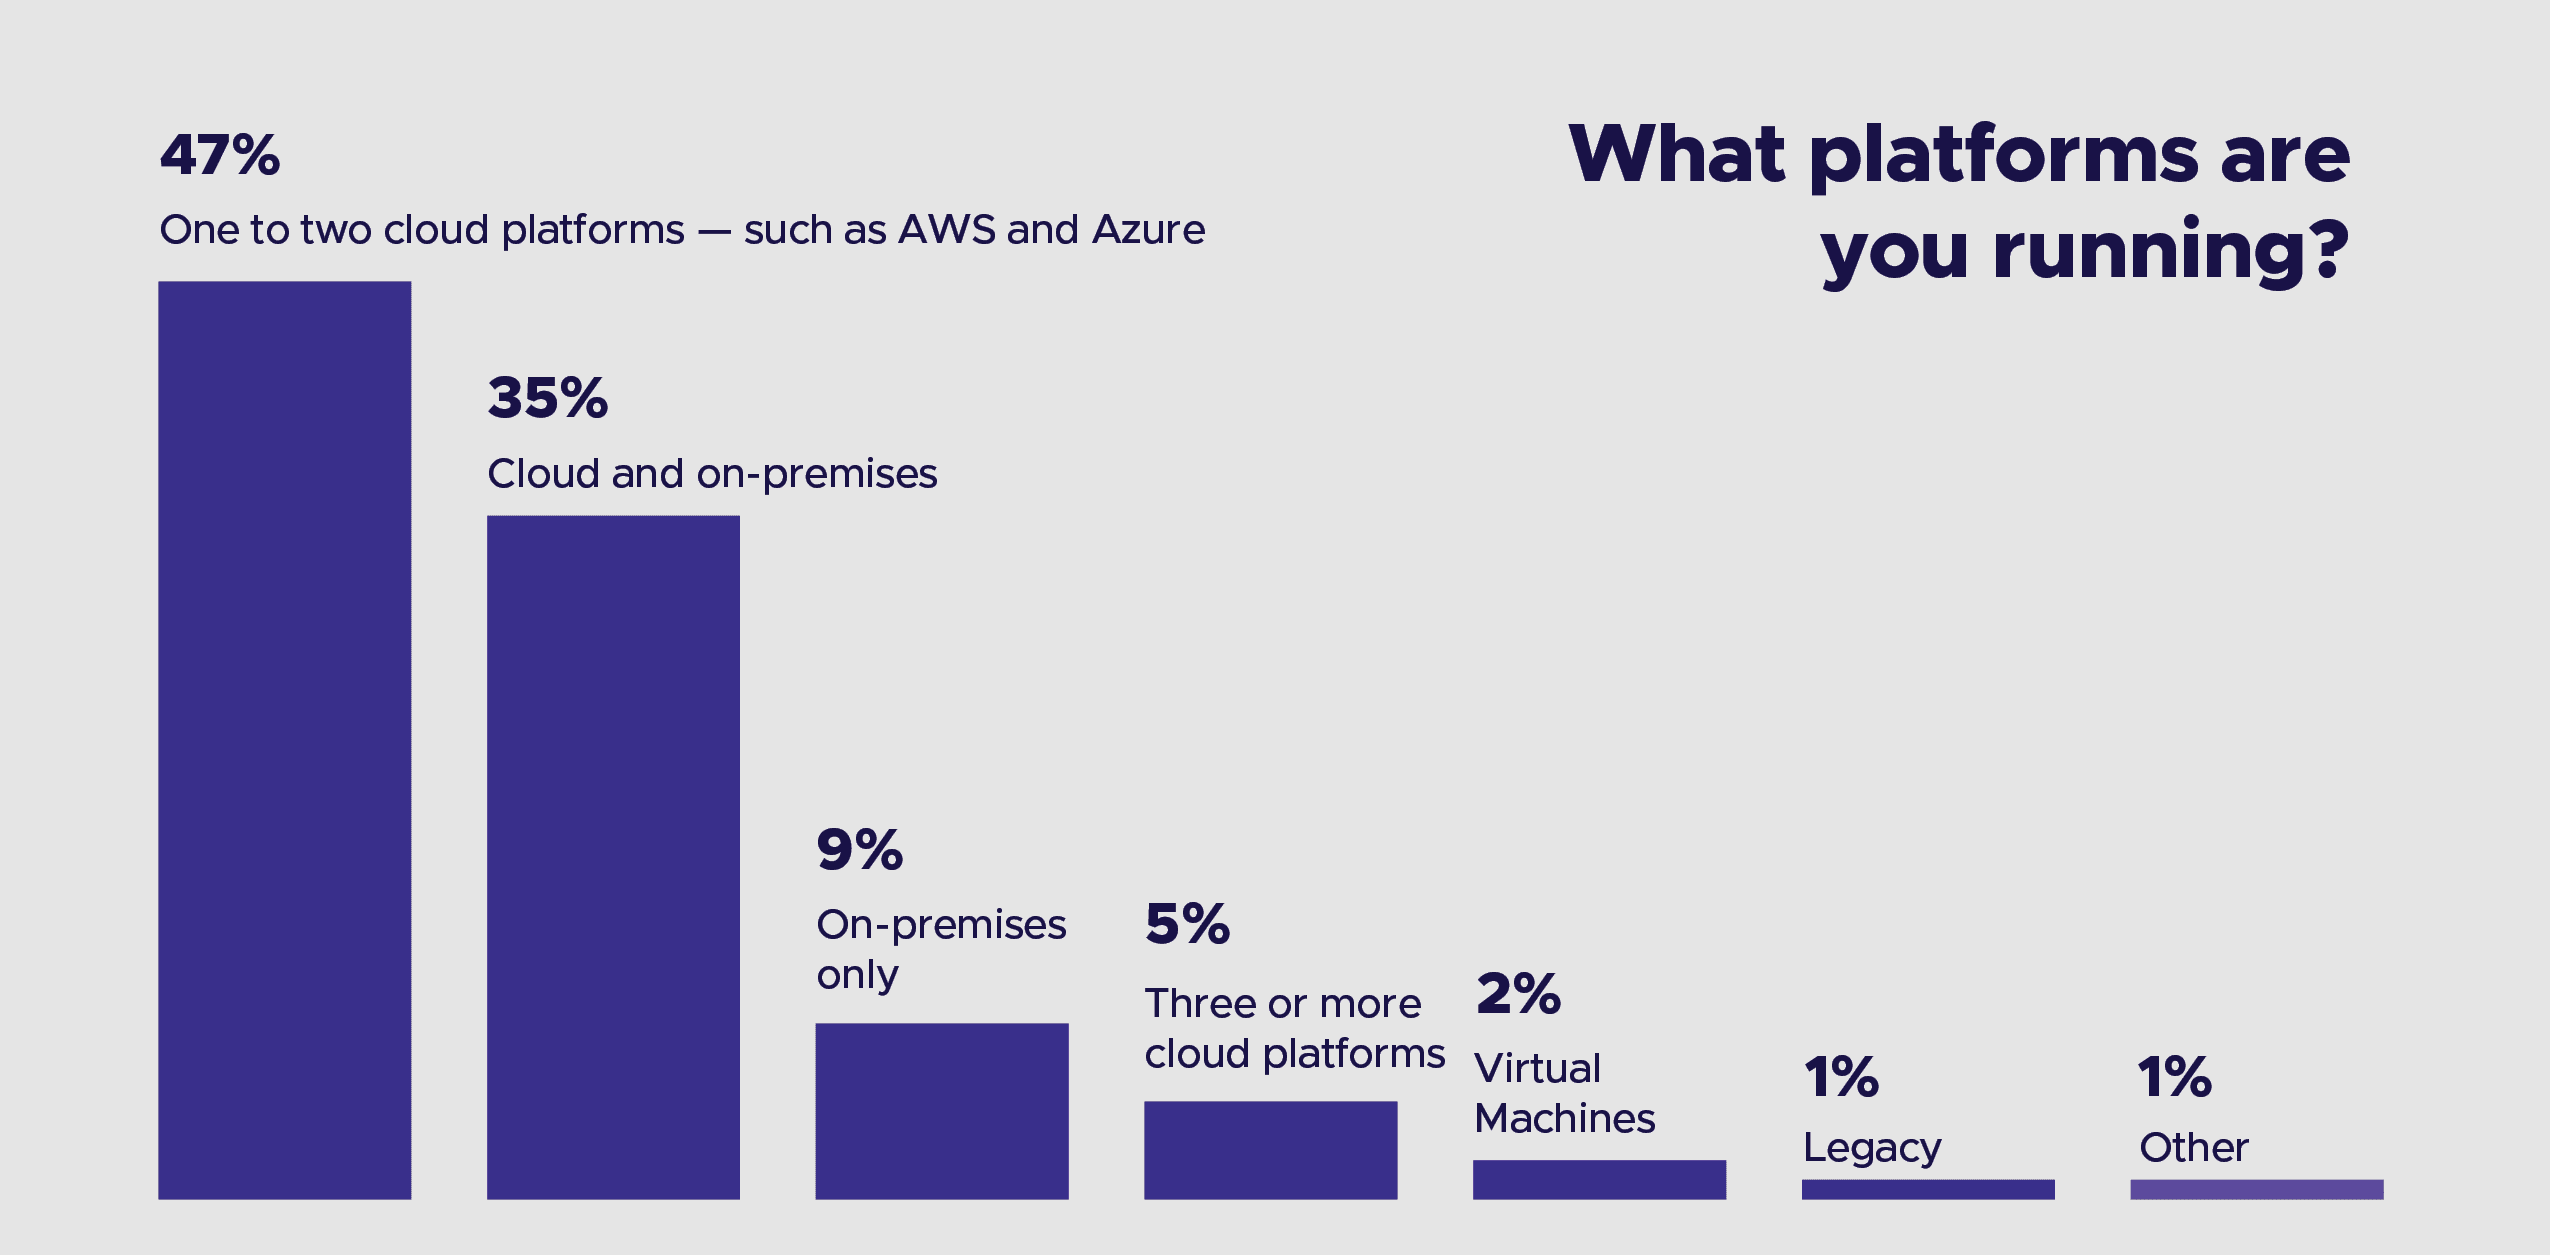 Bar chart showing respondent's respond towards question "What platforms are you running?" 45% of the respondents chose "one to two cloud platforms - such as AWS and Azure"